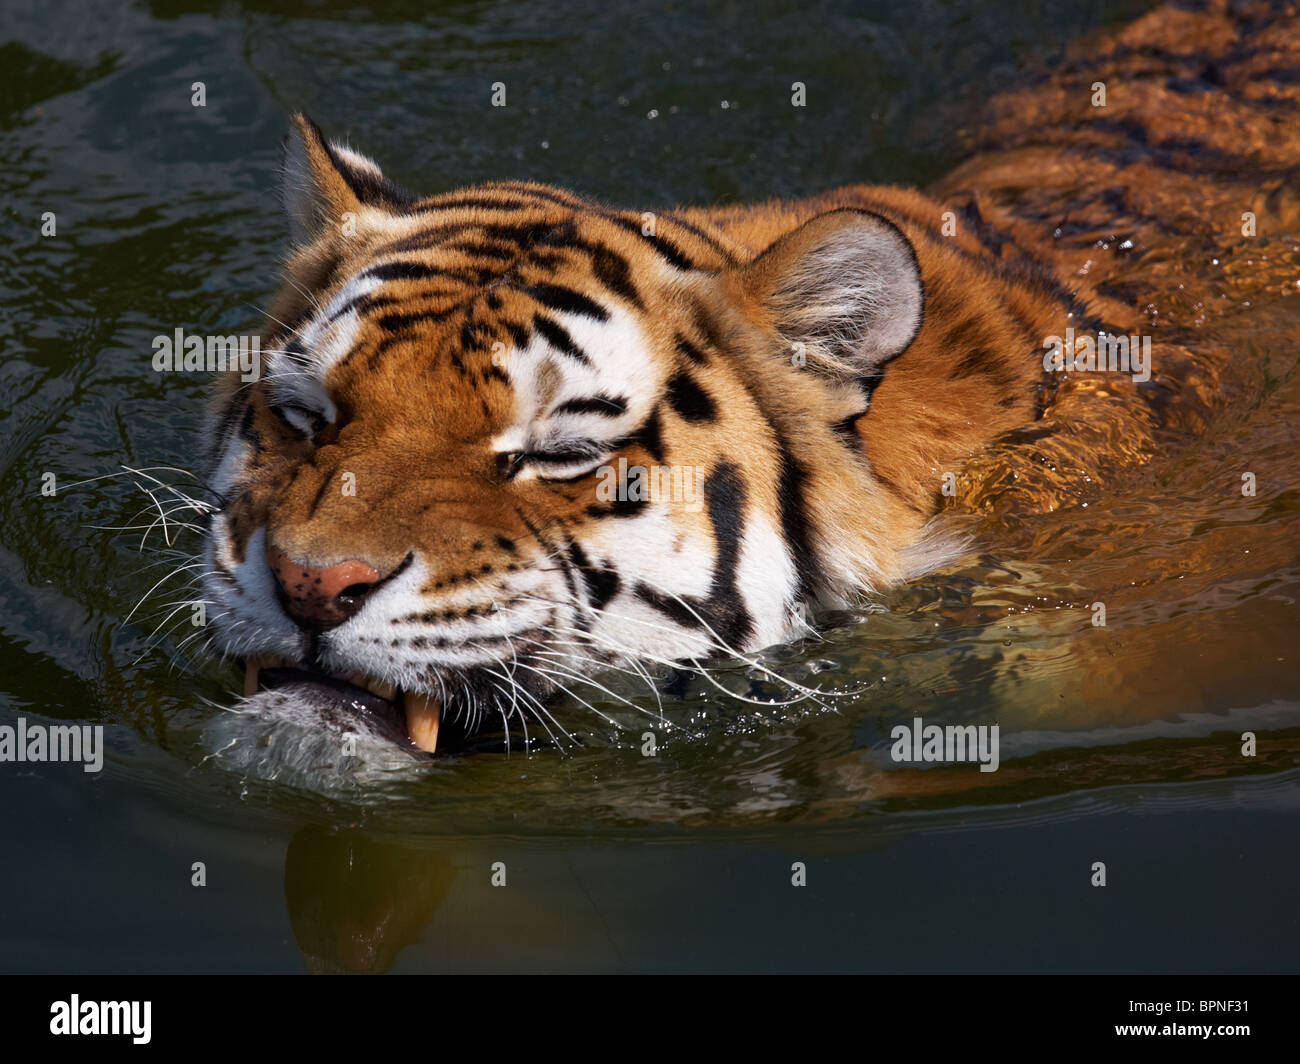 Close-up portrait of a Siberian Tiger swimming in the water Stock Photo